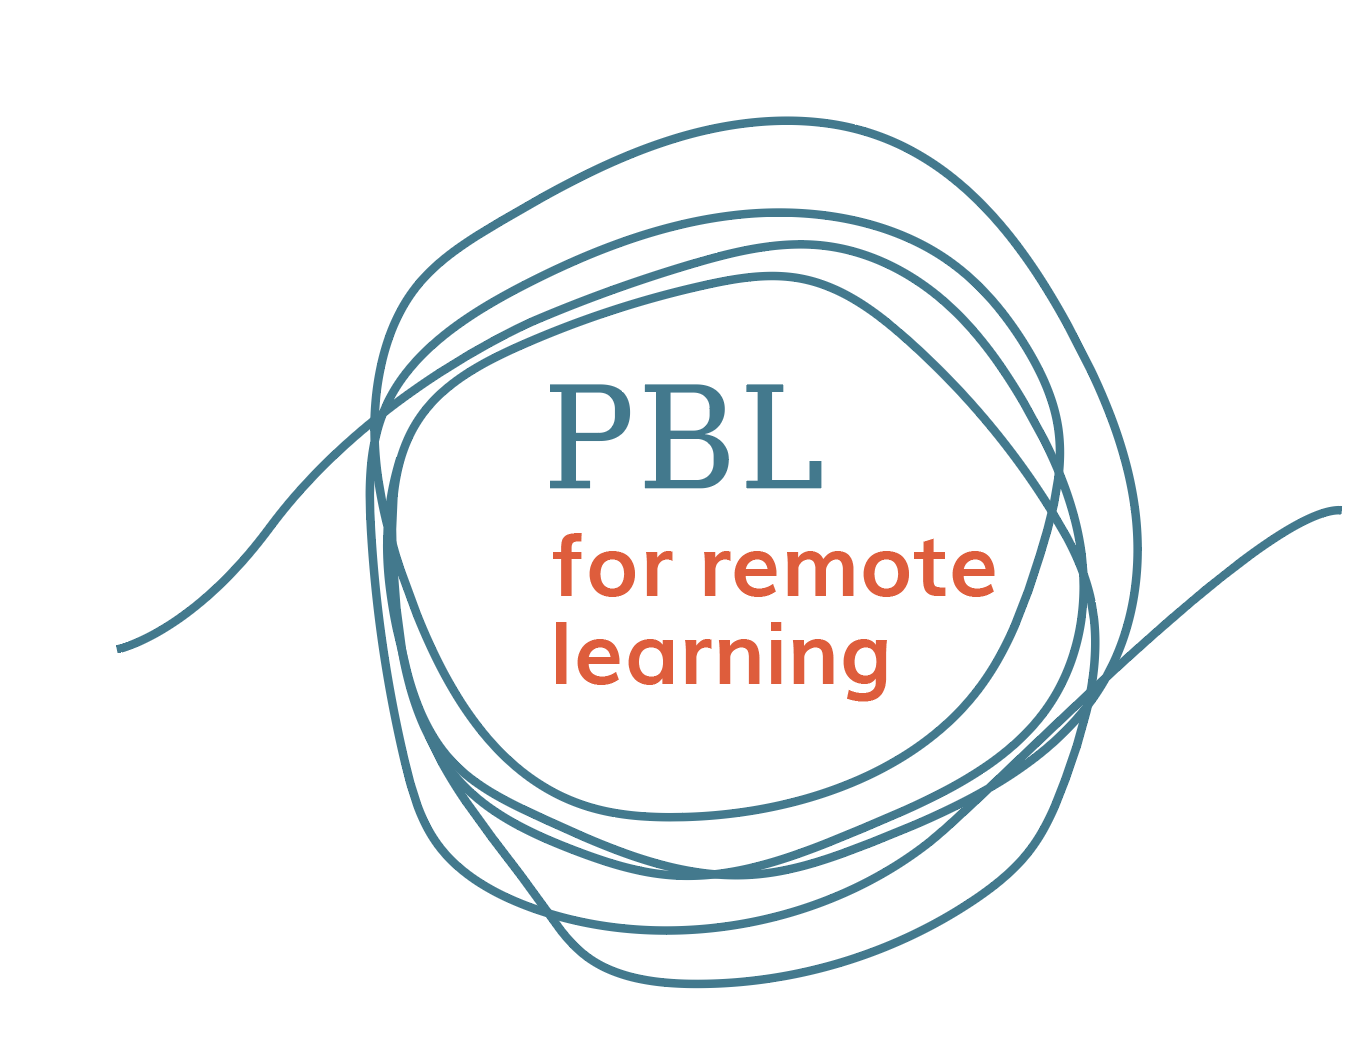 Remote learning